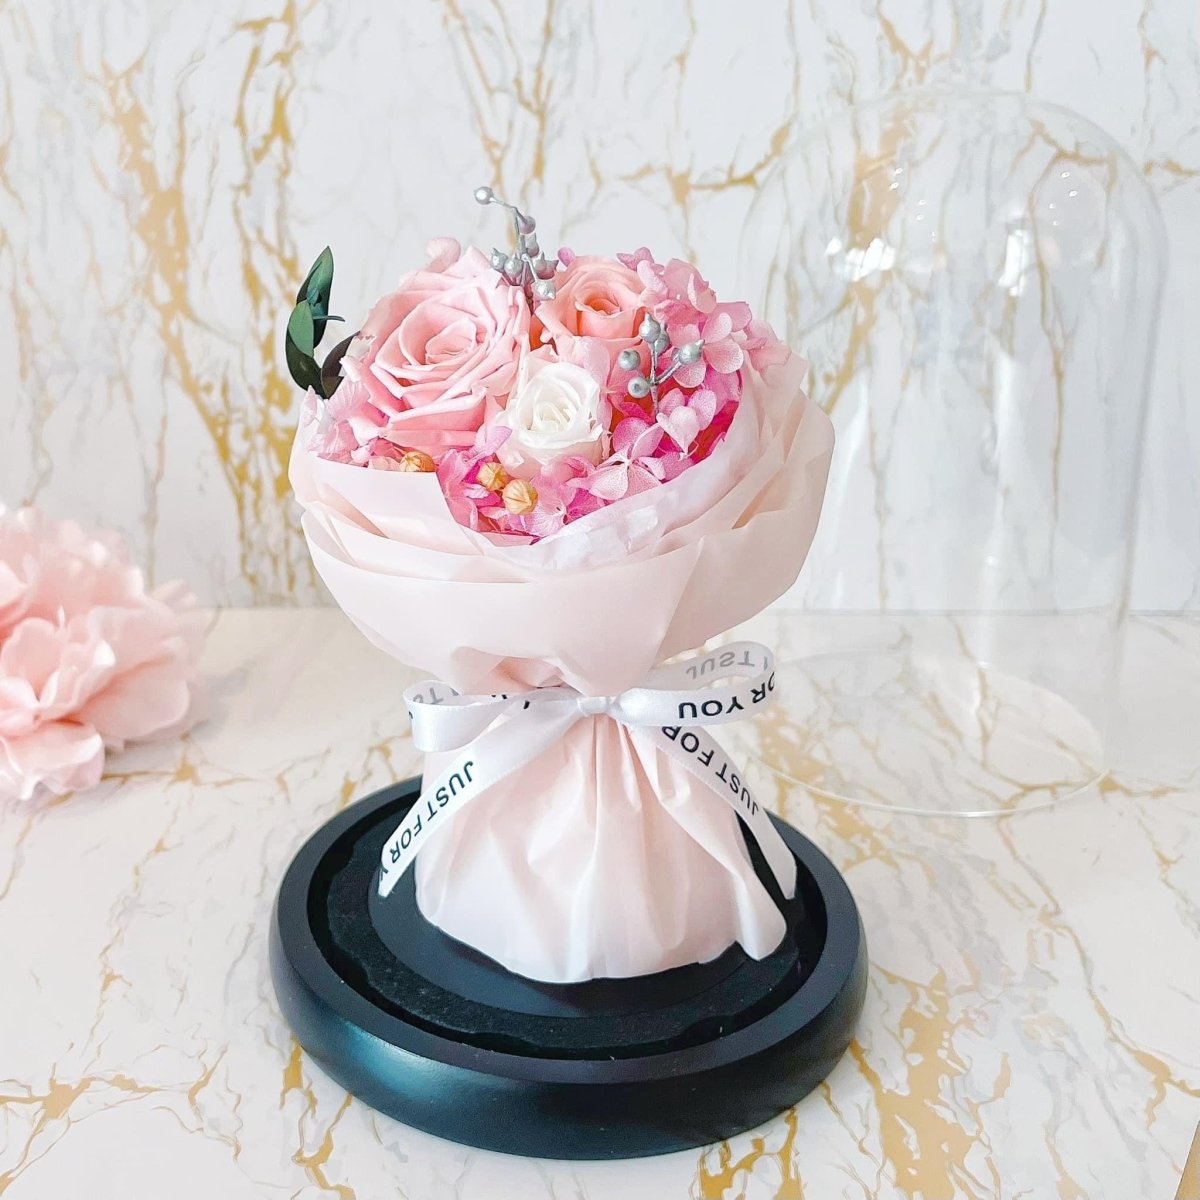 Rose Bouquet Dome - Everlasting Flower Bouquet (Real Preserved Roses and Dried Flowers) - Rainbowly Fresh Fruit Gift and Flower Arrangments